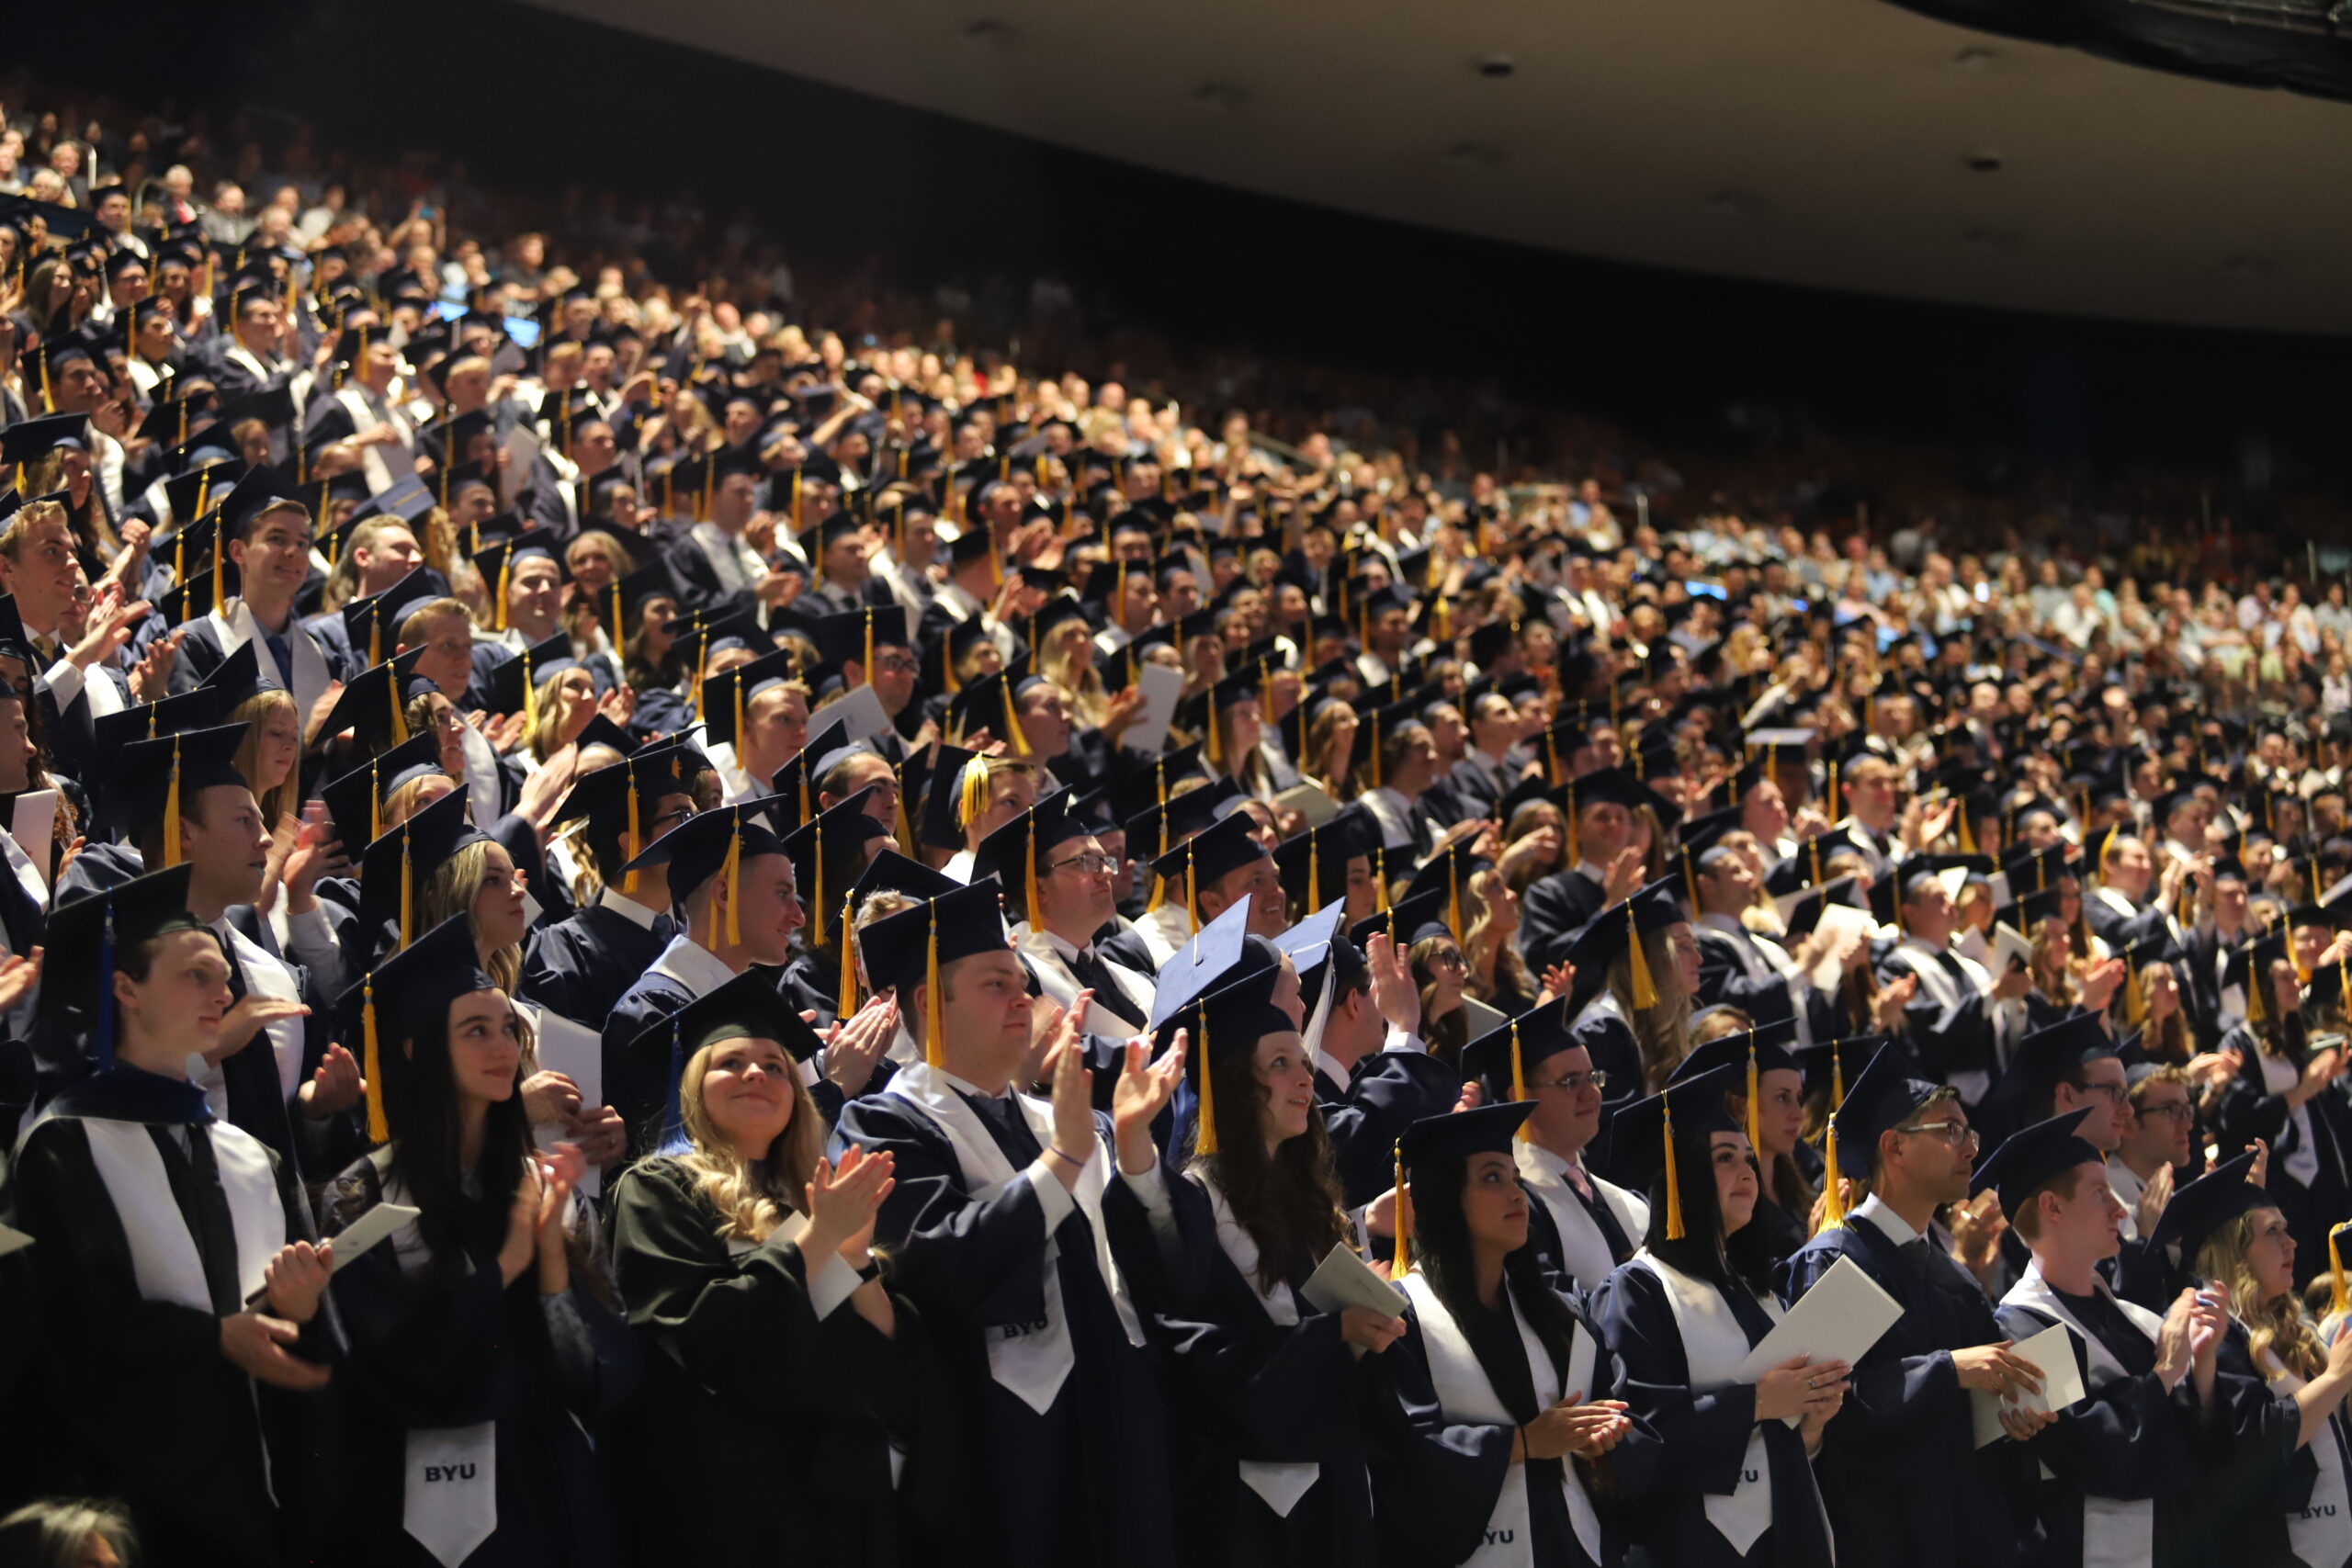 BYU holds first inperson commencement ceremony since COVID19 began